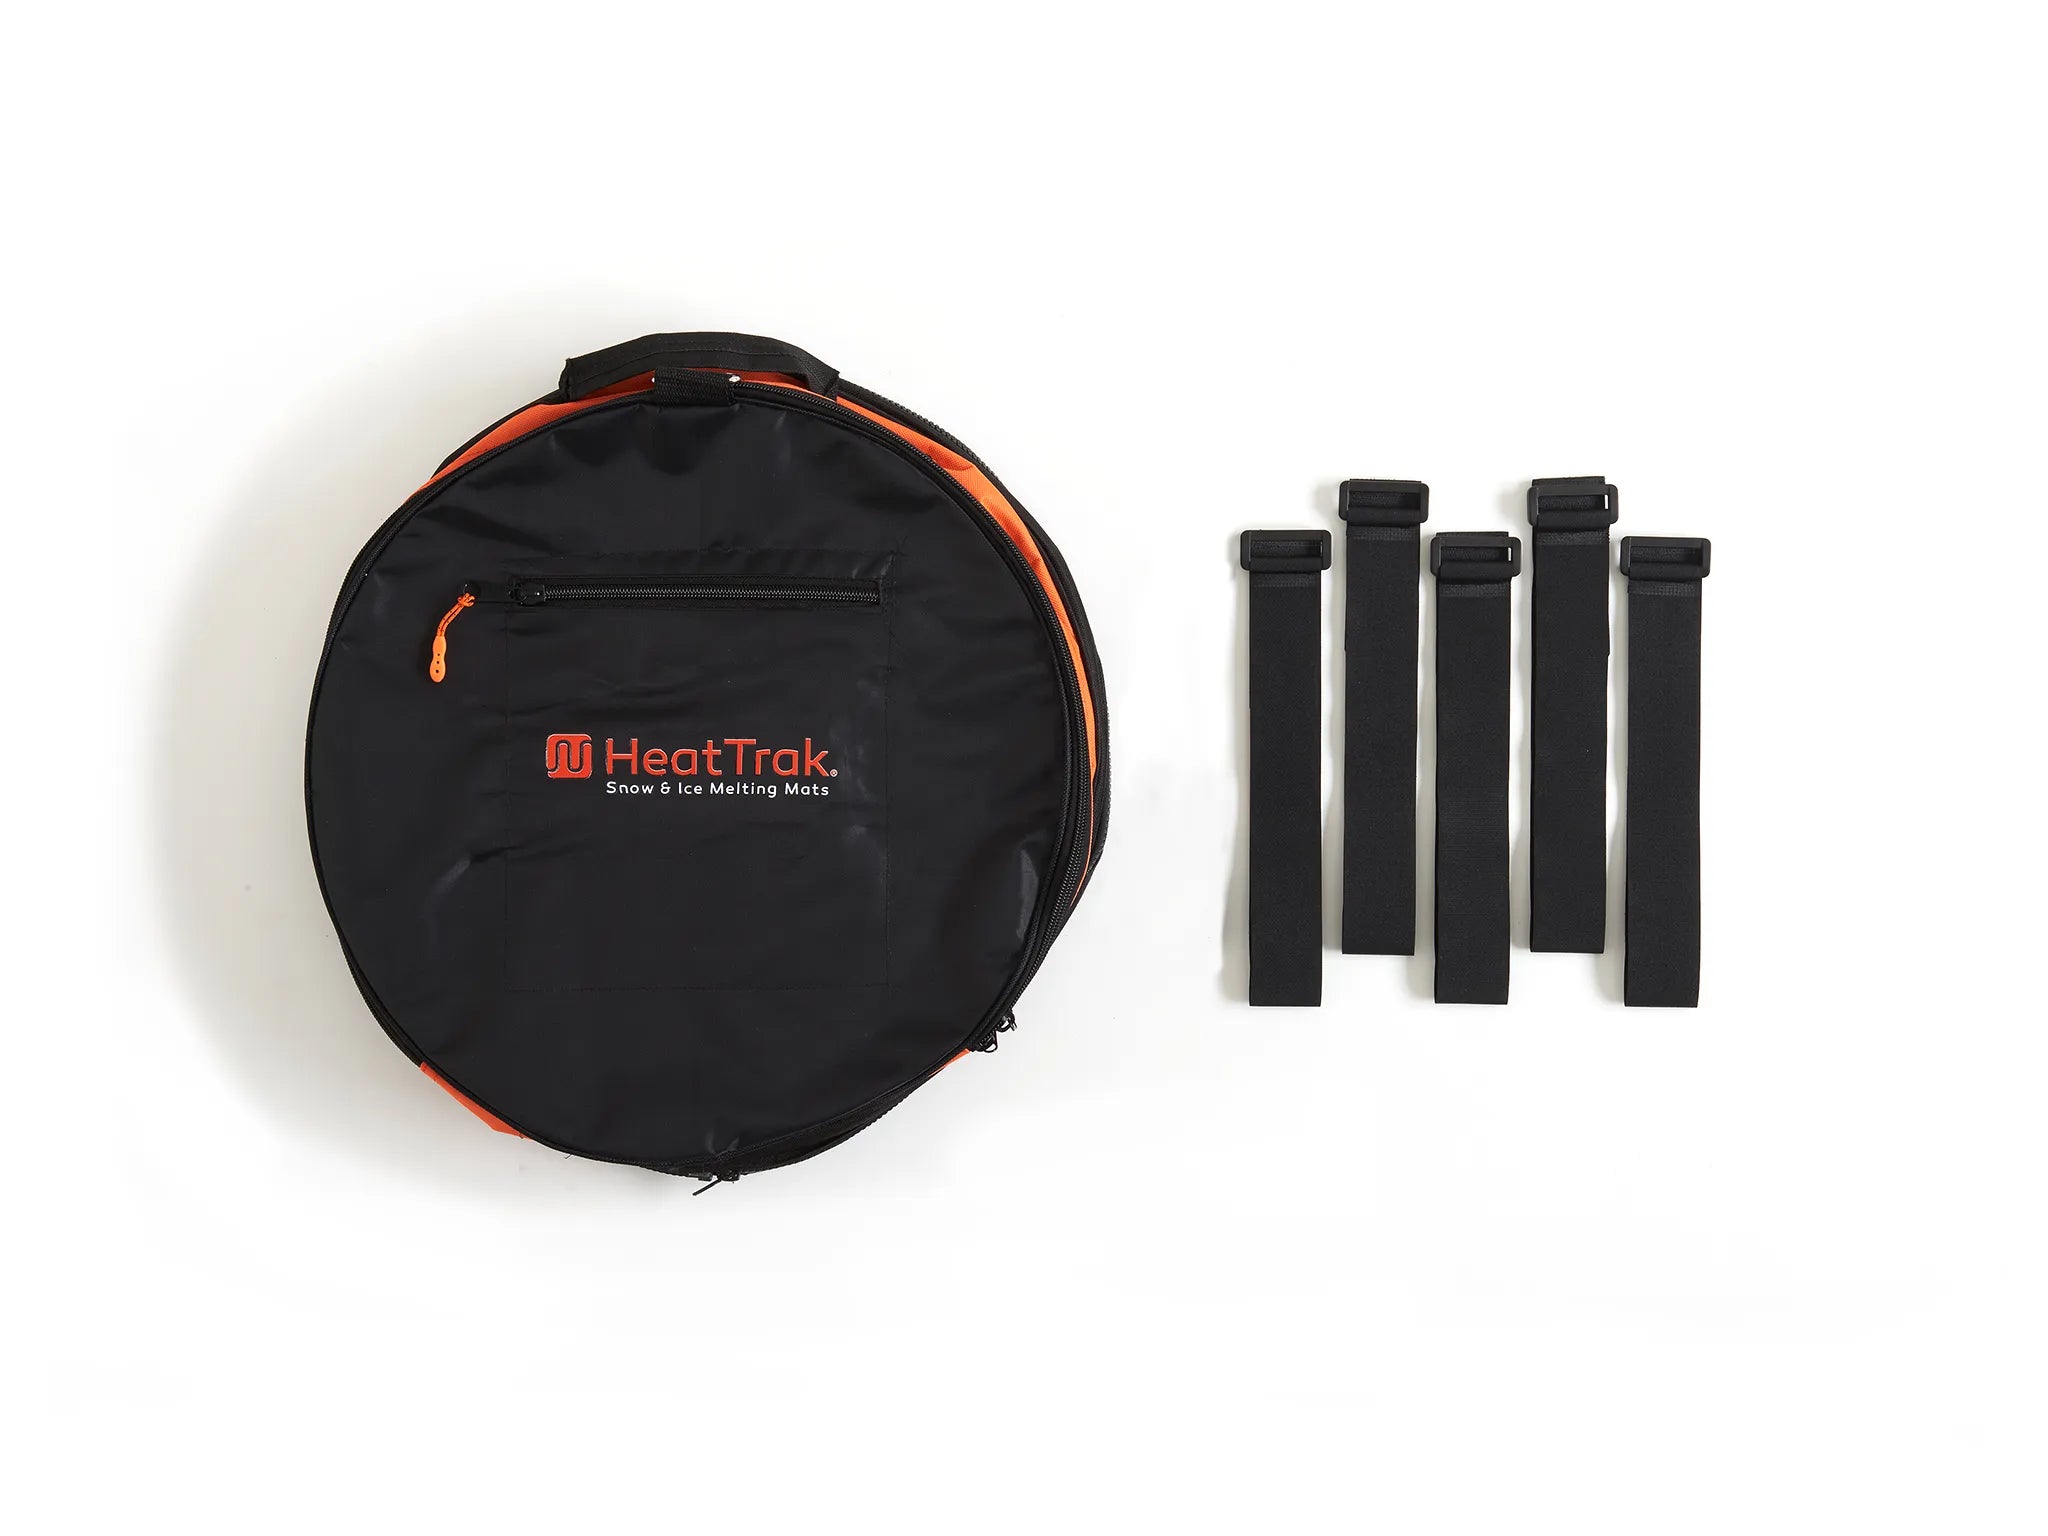 HeatTrak Storage Bag collapsed with mat wrapping straps.